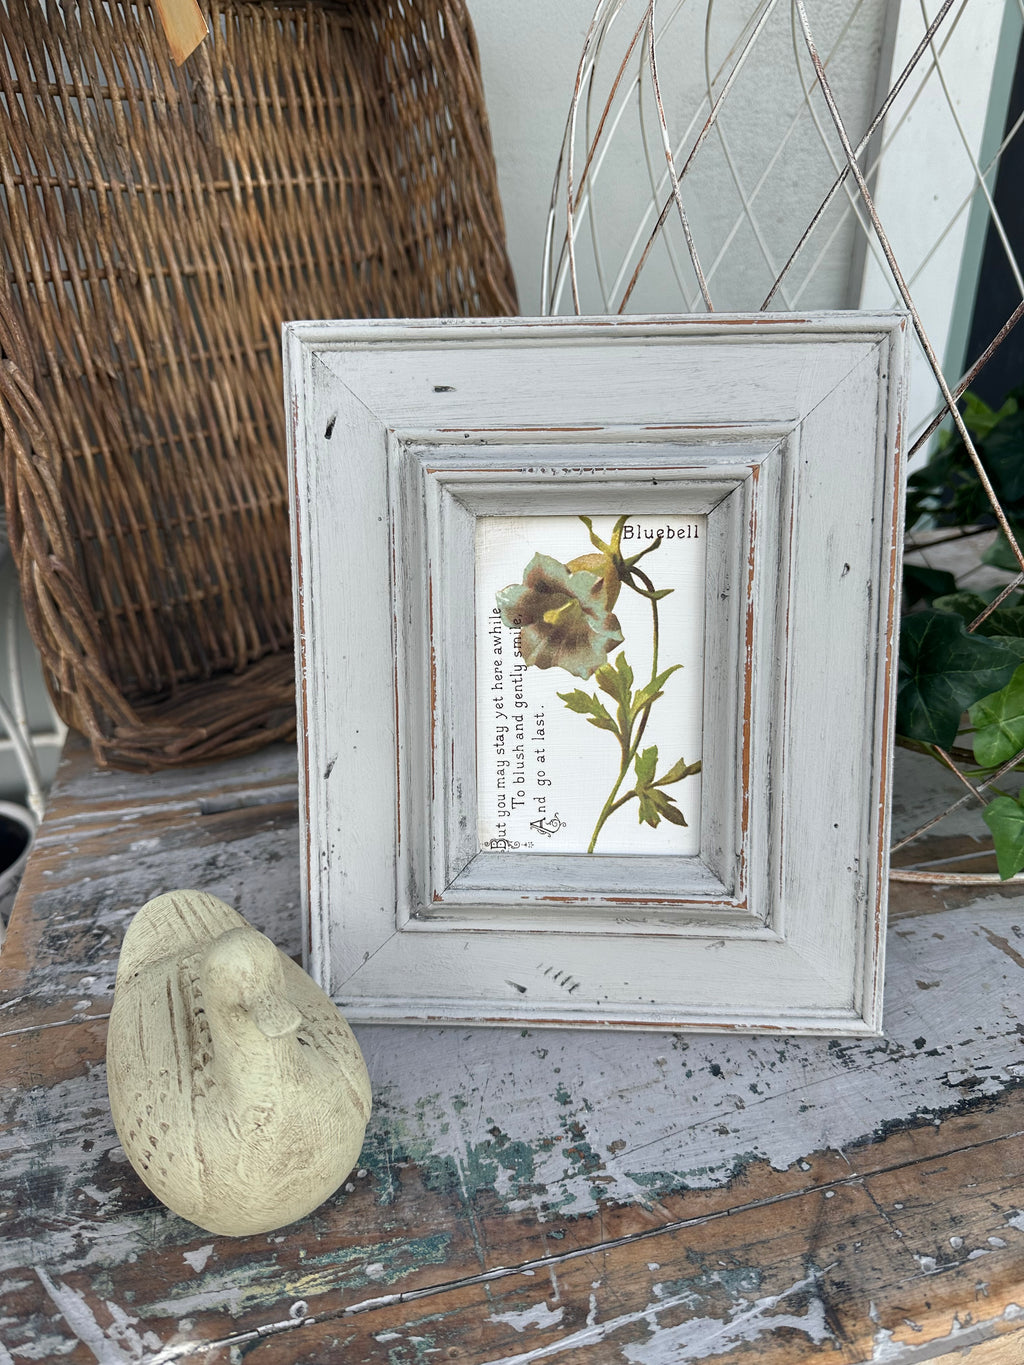 Framed Bluebell with writing - painted ex the PMV studio